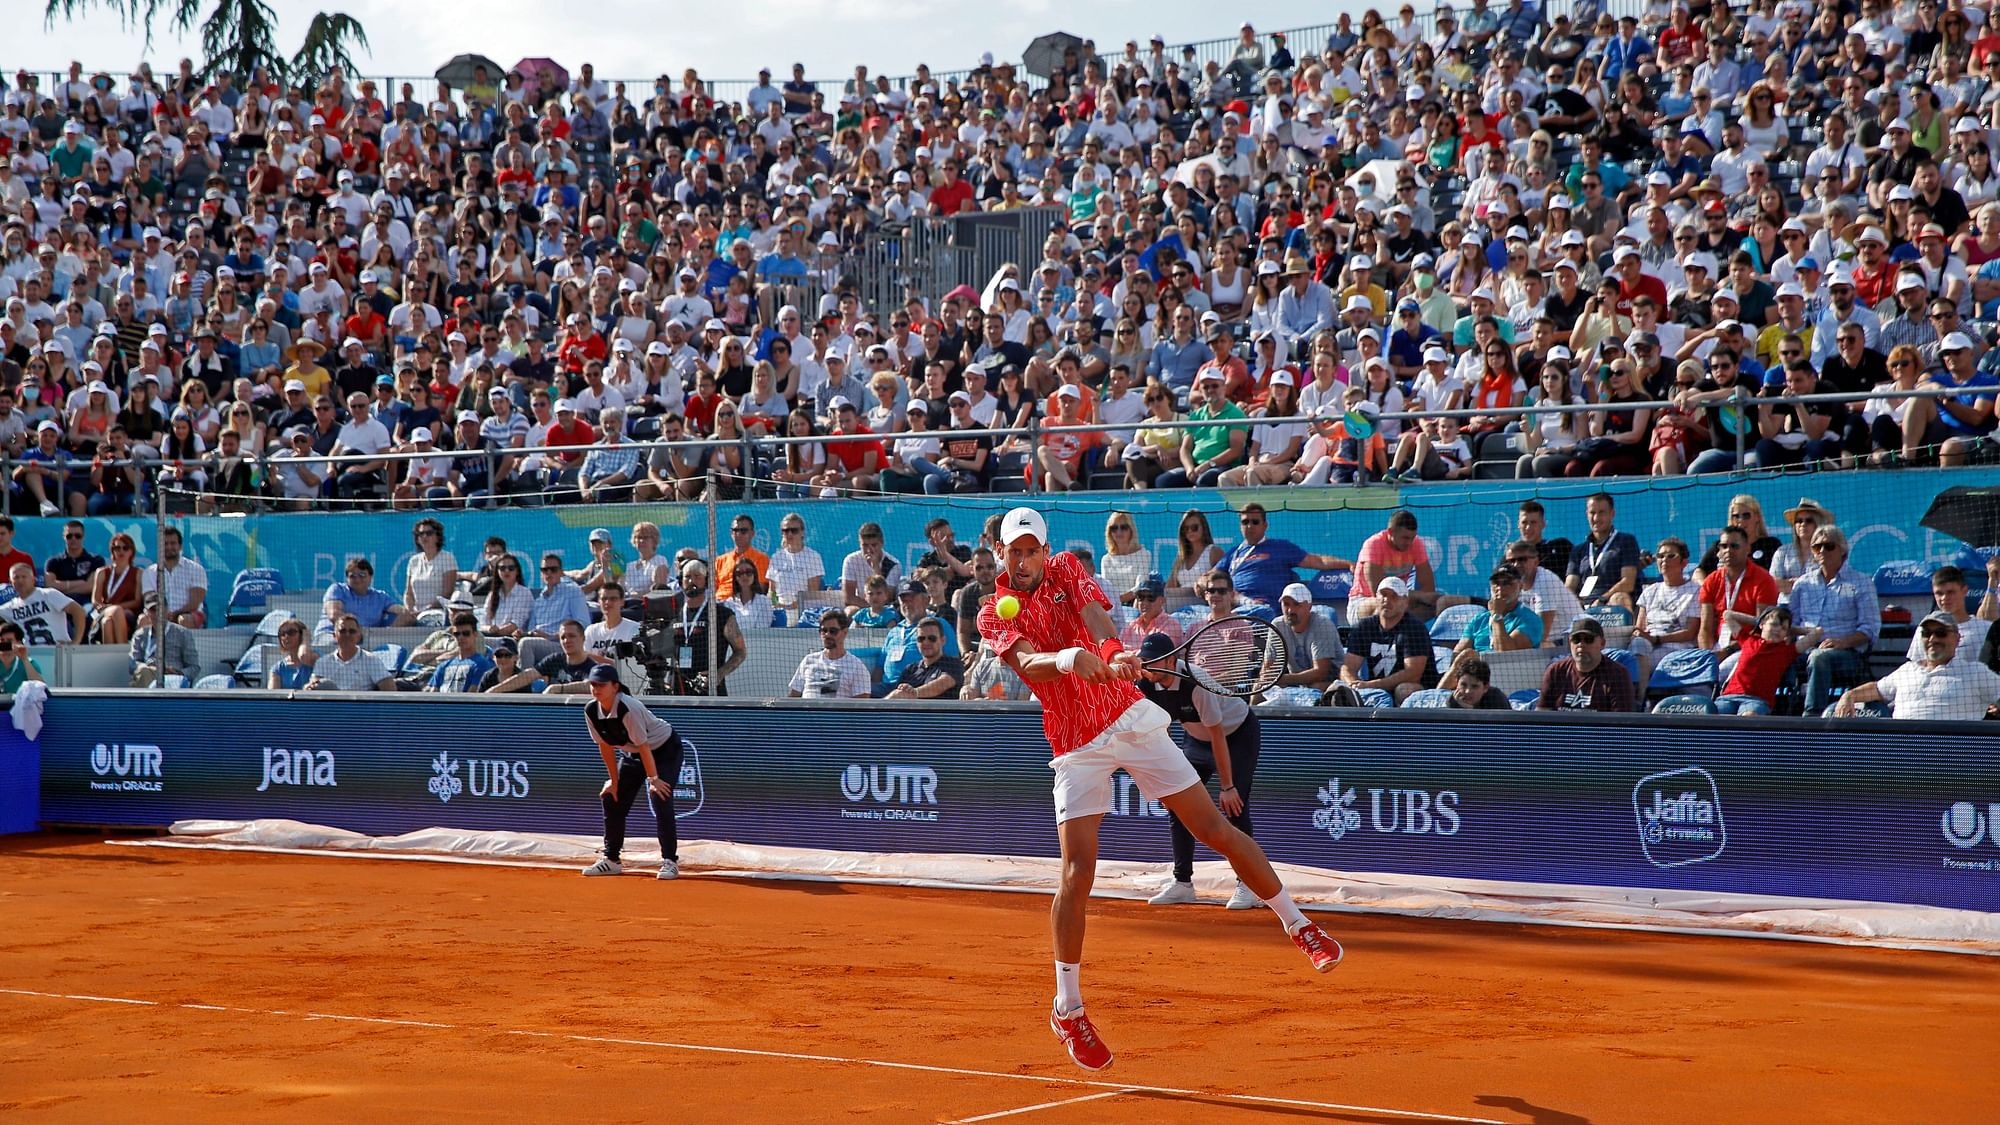 Novak Djokovic organised The Adria Tour which has now become a hotspot for the spread of coronavirus.